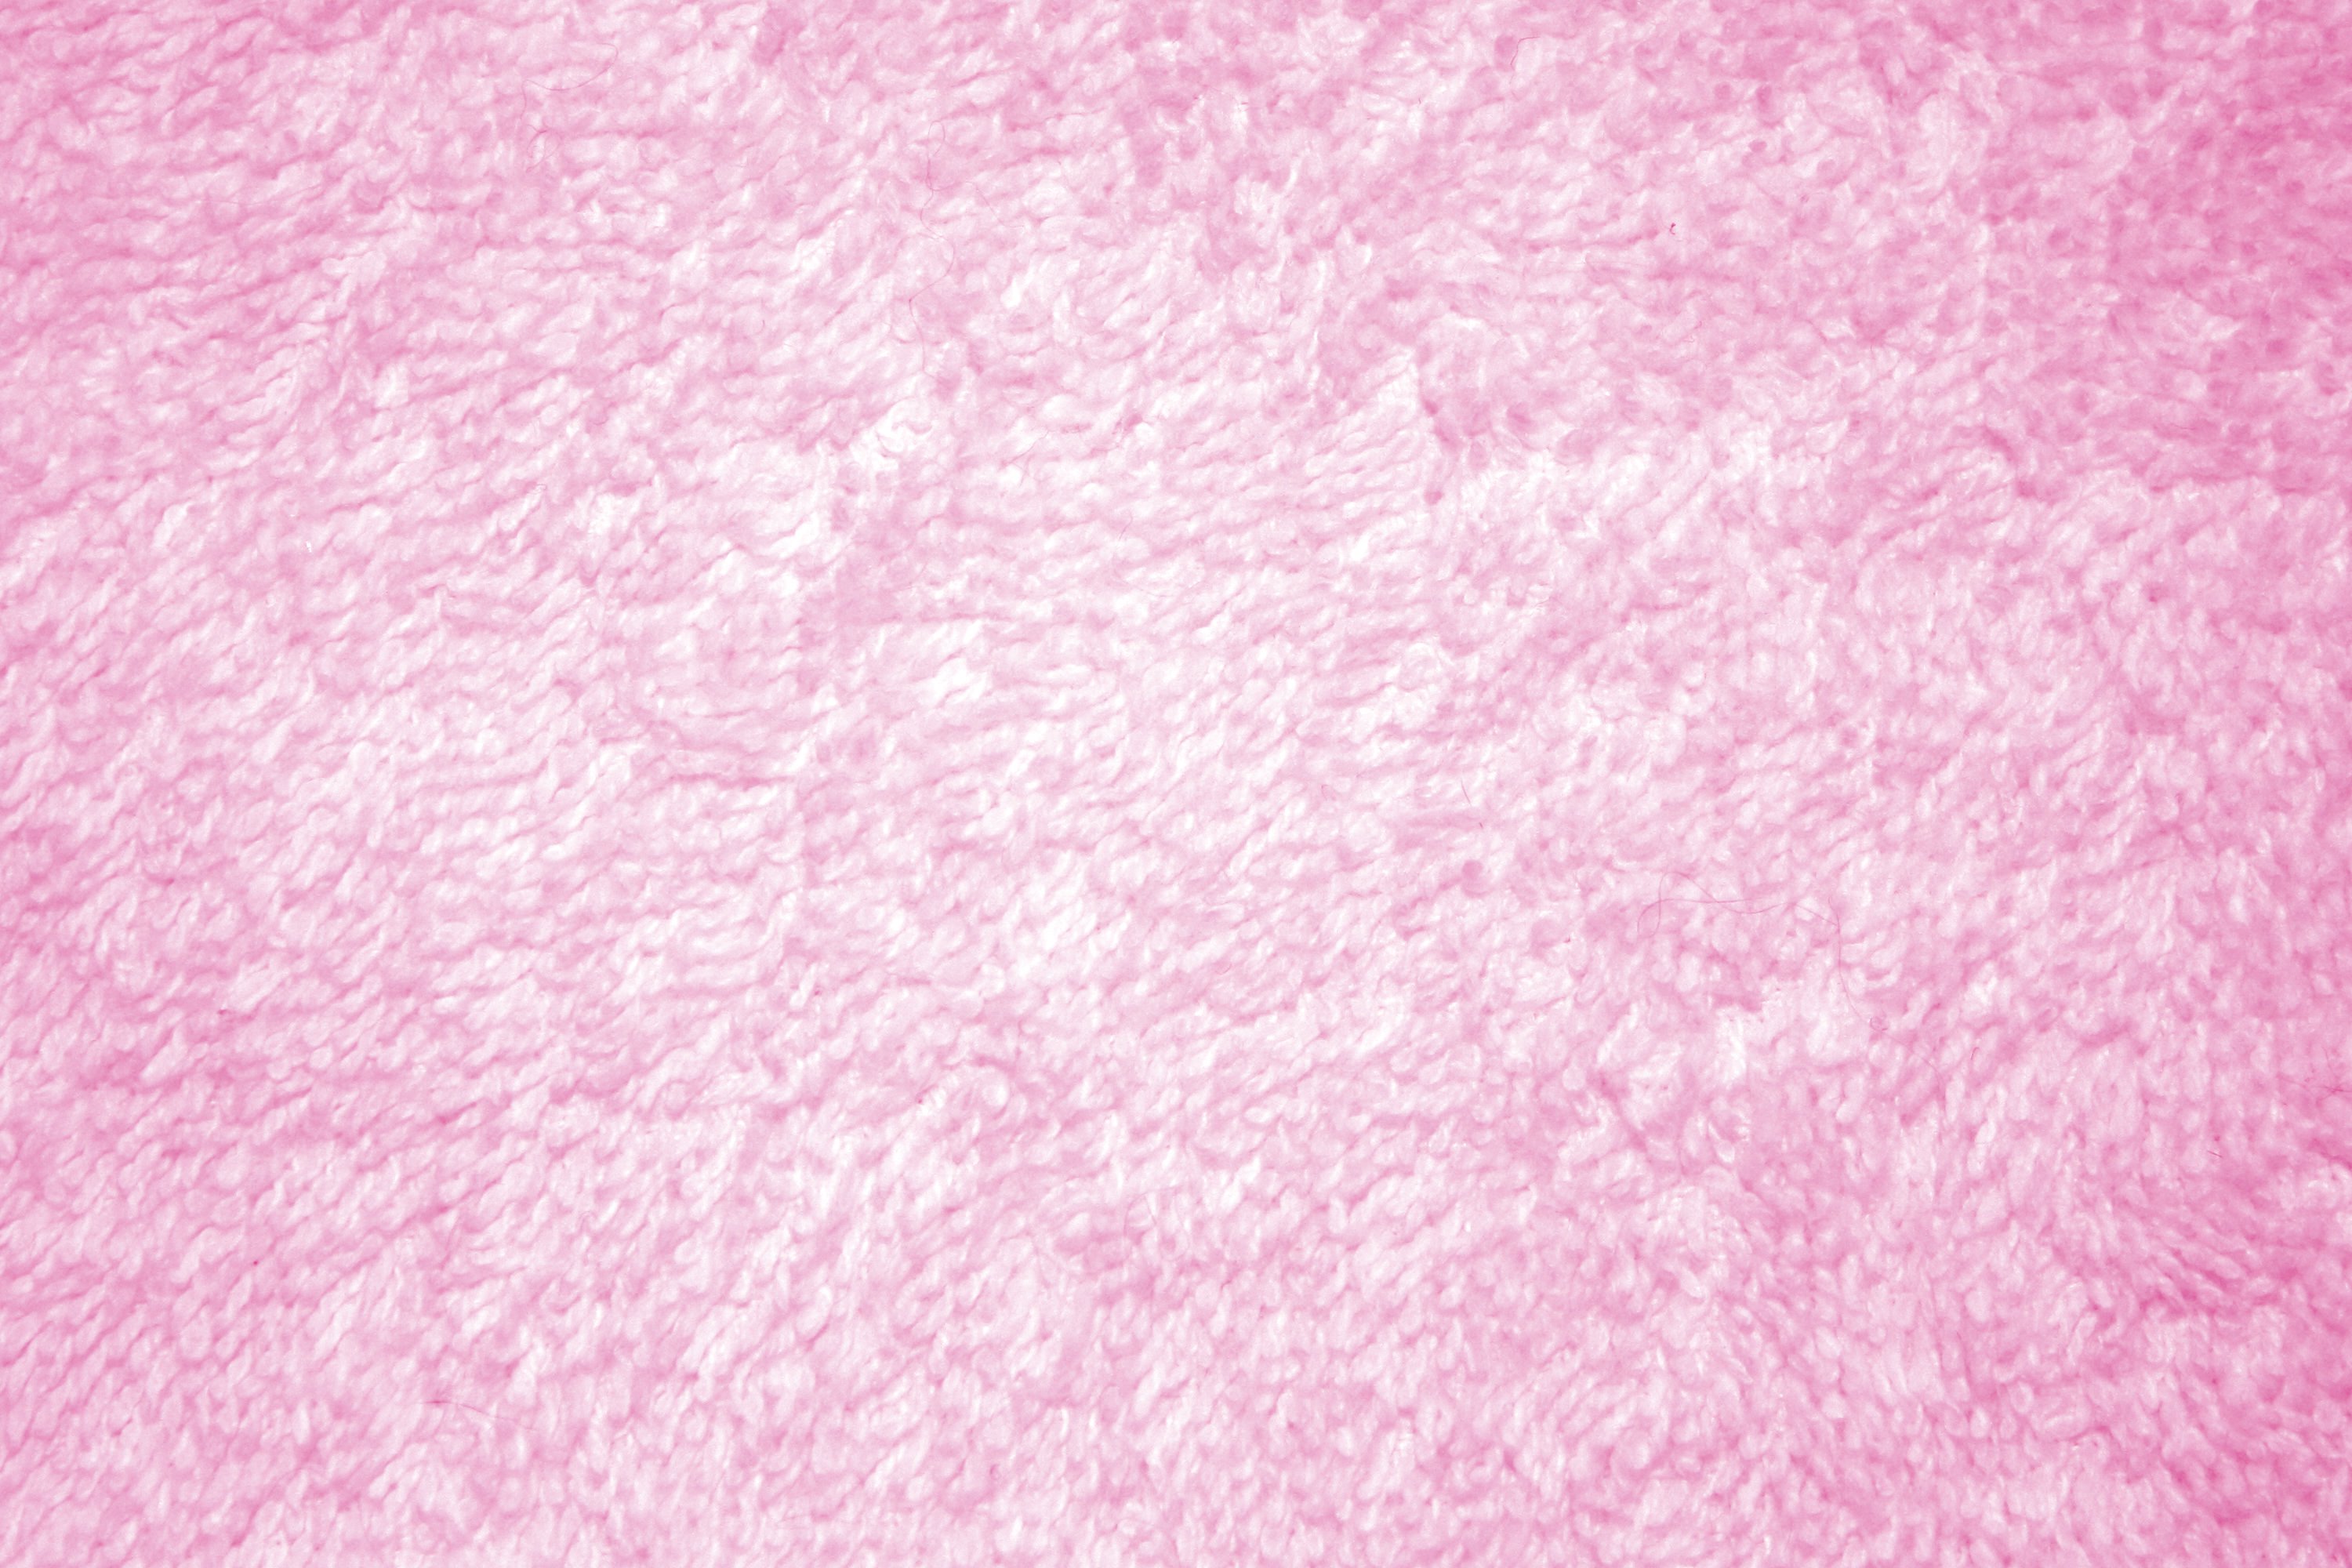 Pink Terry Cloth Texture Picture | Free Photograph | Photos Public ...